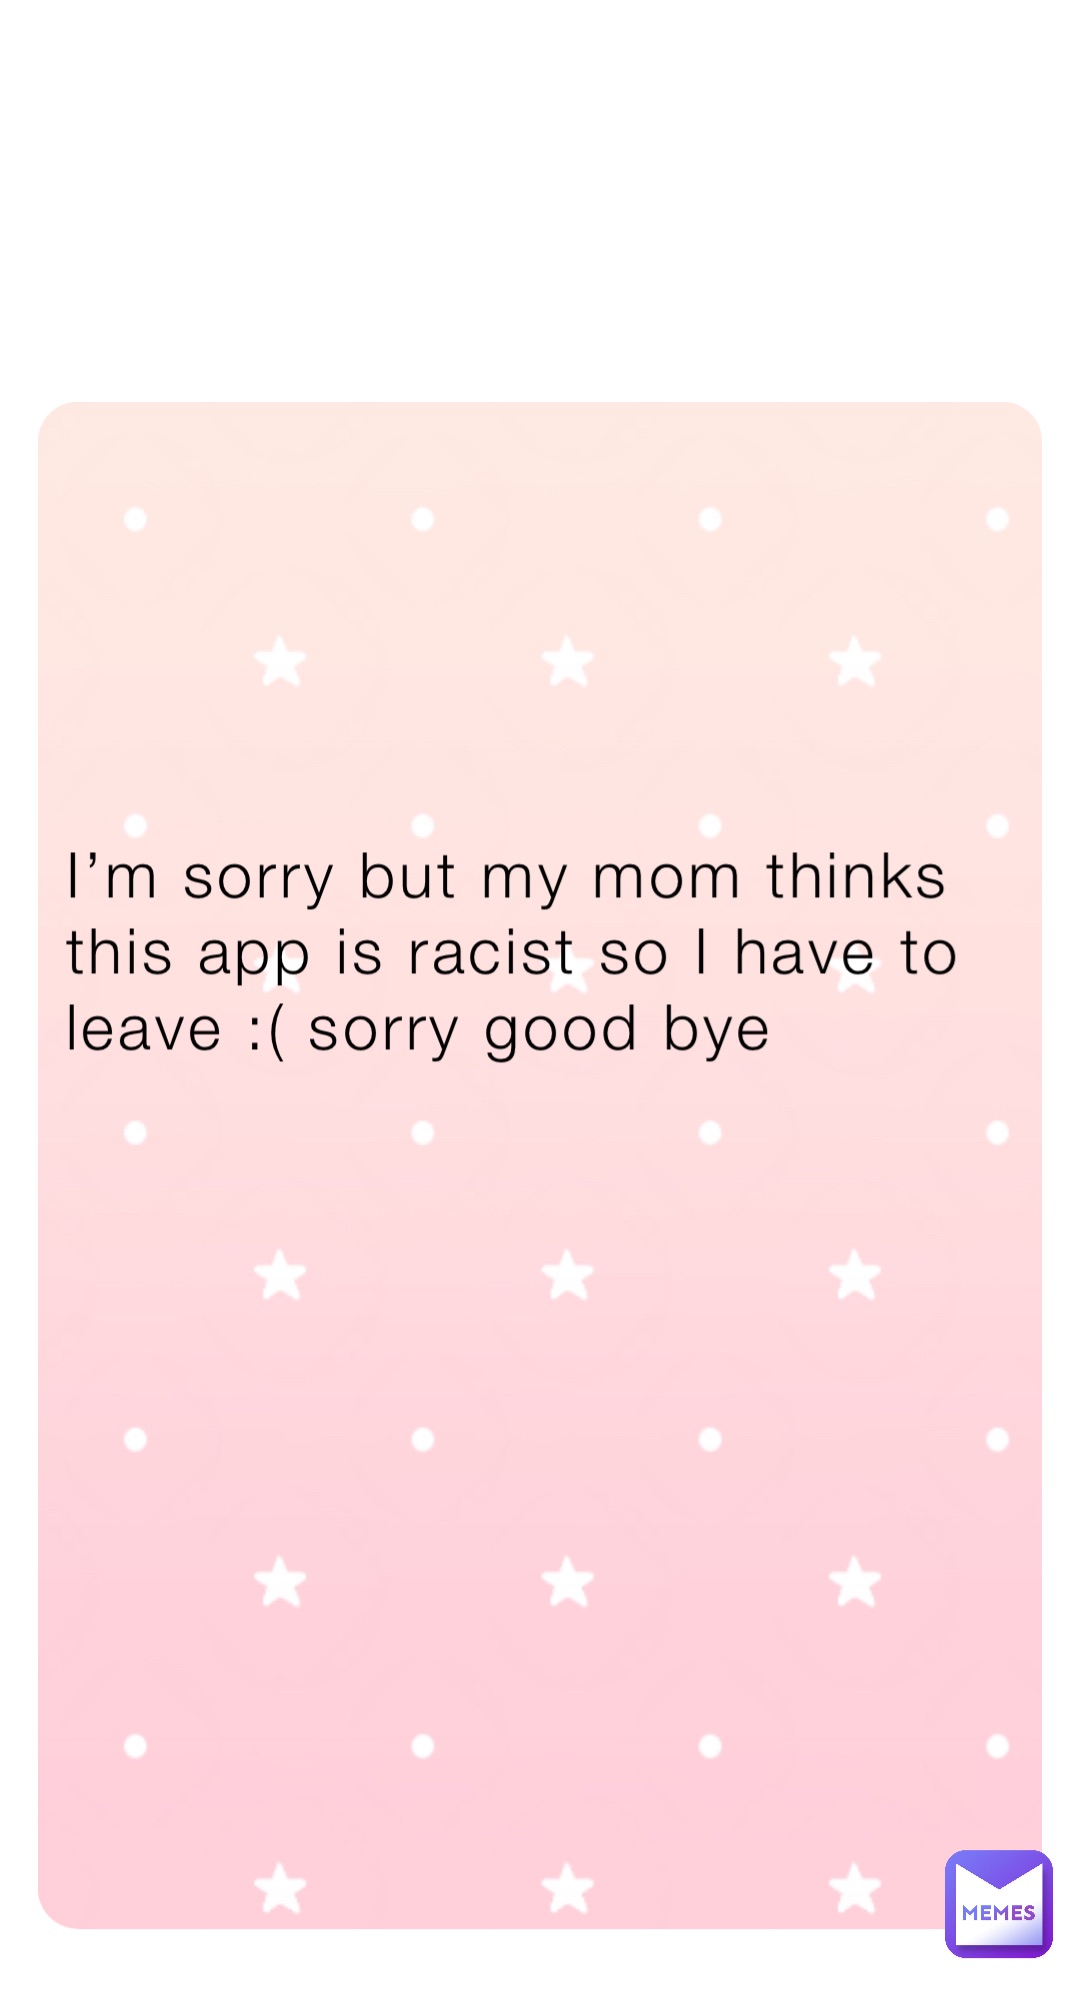 I’m sorry but my mom thinks this app is racist so I have to leave :( sorry good bye